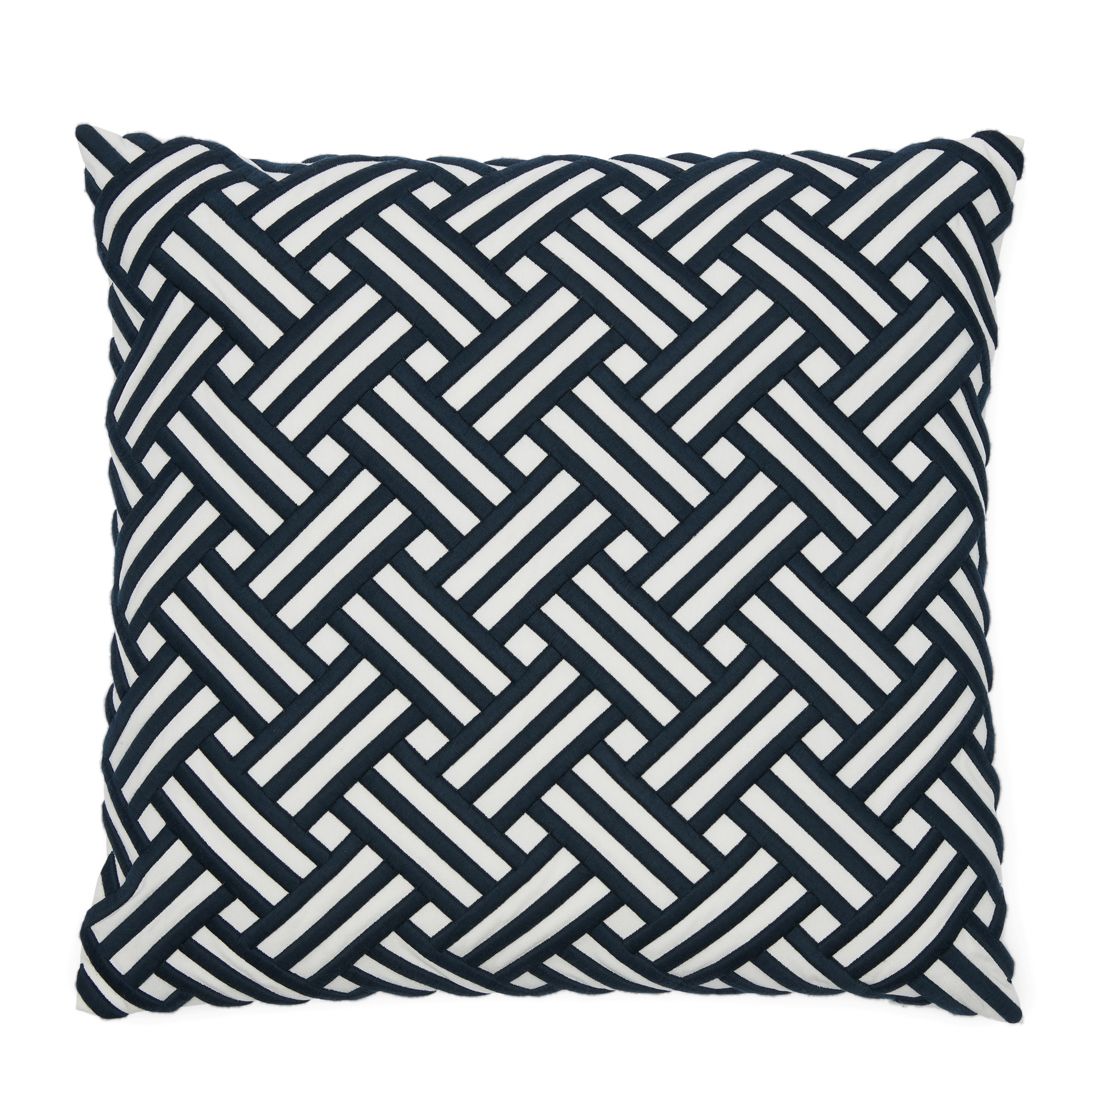 Yacth Club Classic Pillow Cover